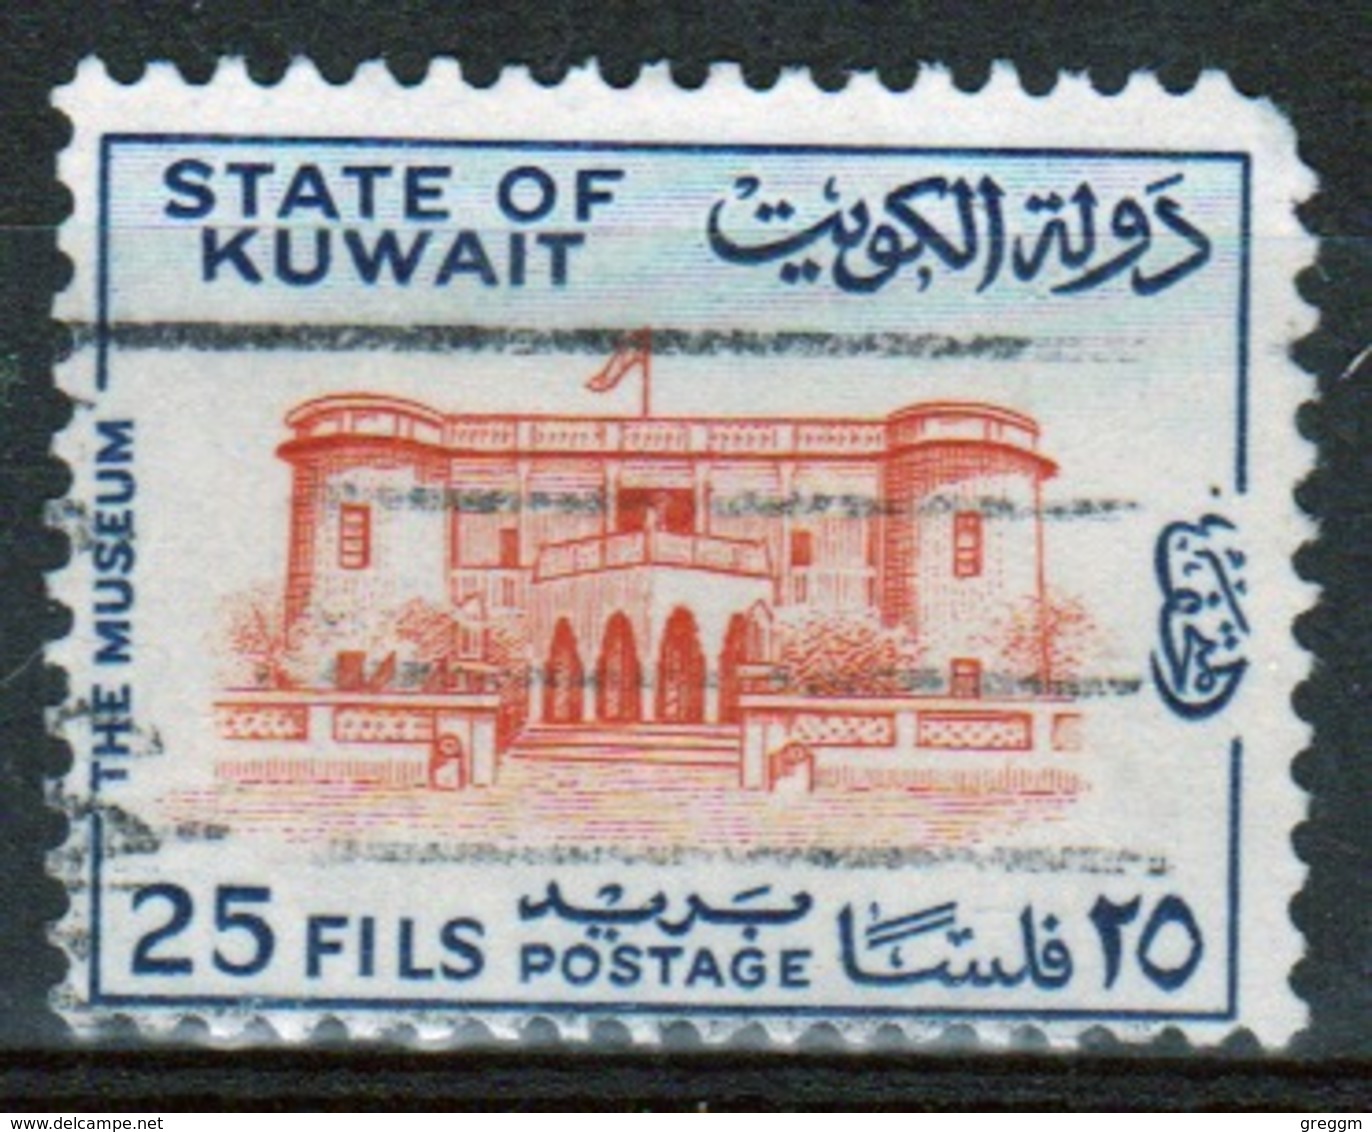 Kuwait 1968 Single Used 25 Fils Stamp From The National Museum Set.. - Kuwait